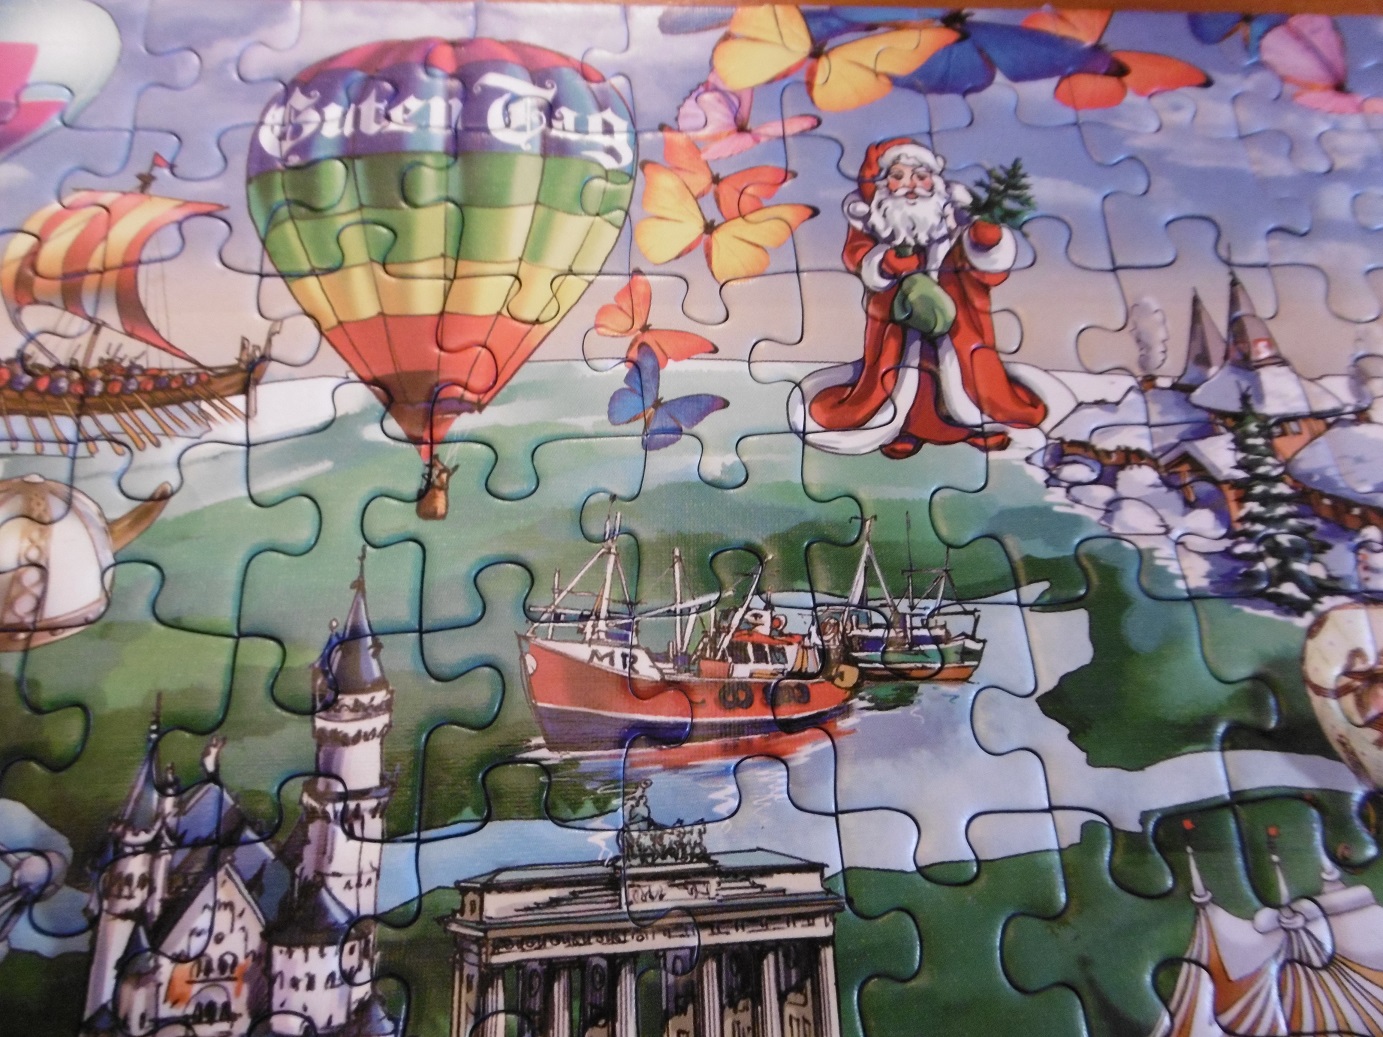 IT’S A BIG WORLD OUT THERE 500 TEILE PUZZLE CASTORLAND 52295 